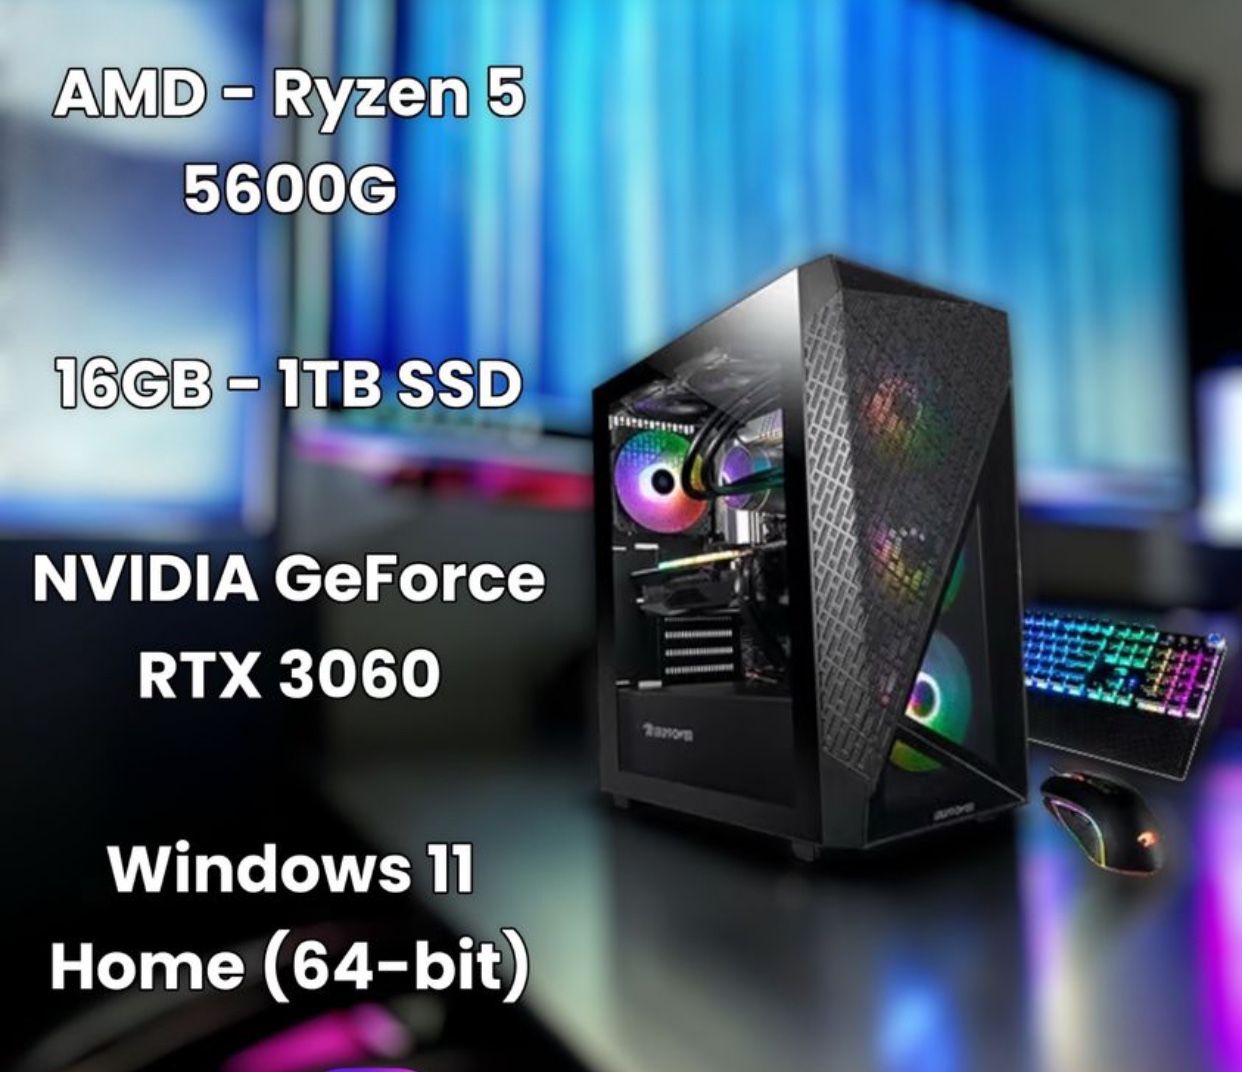 Gaming Pc (no Keyboard Or Mouse Included)